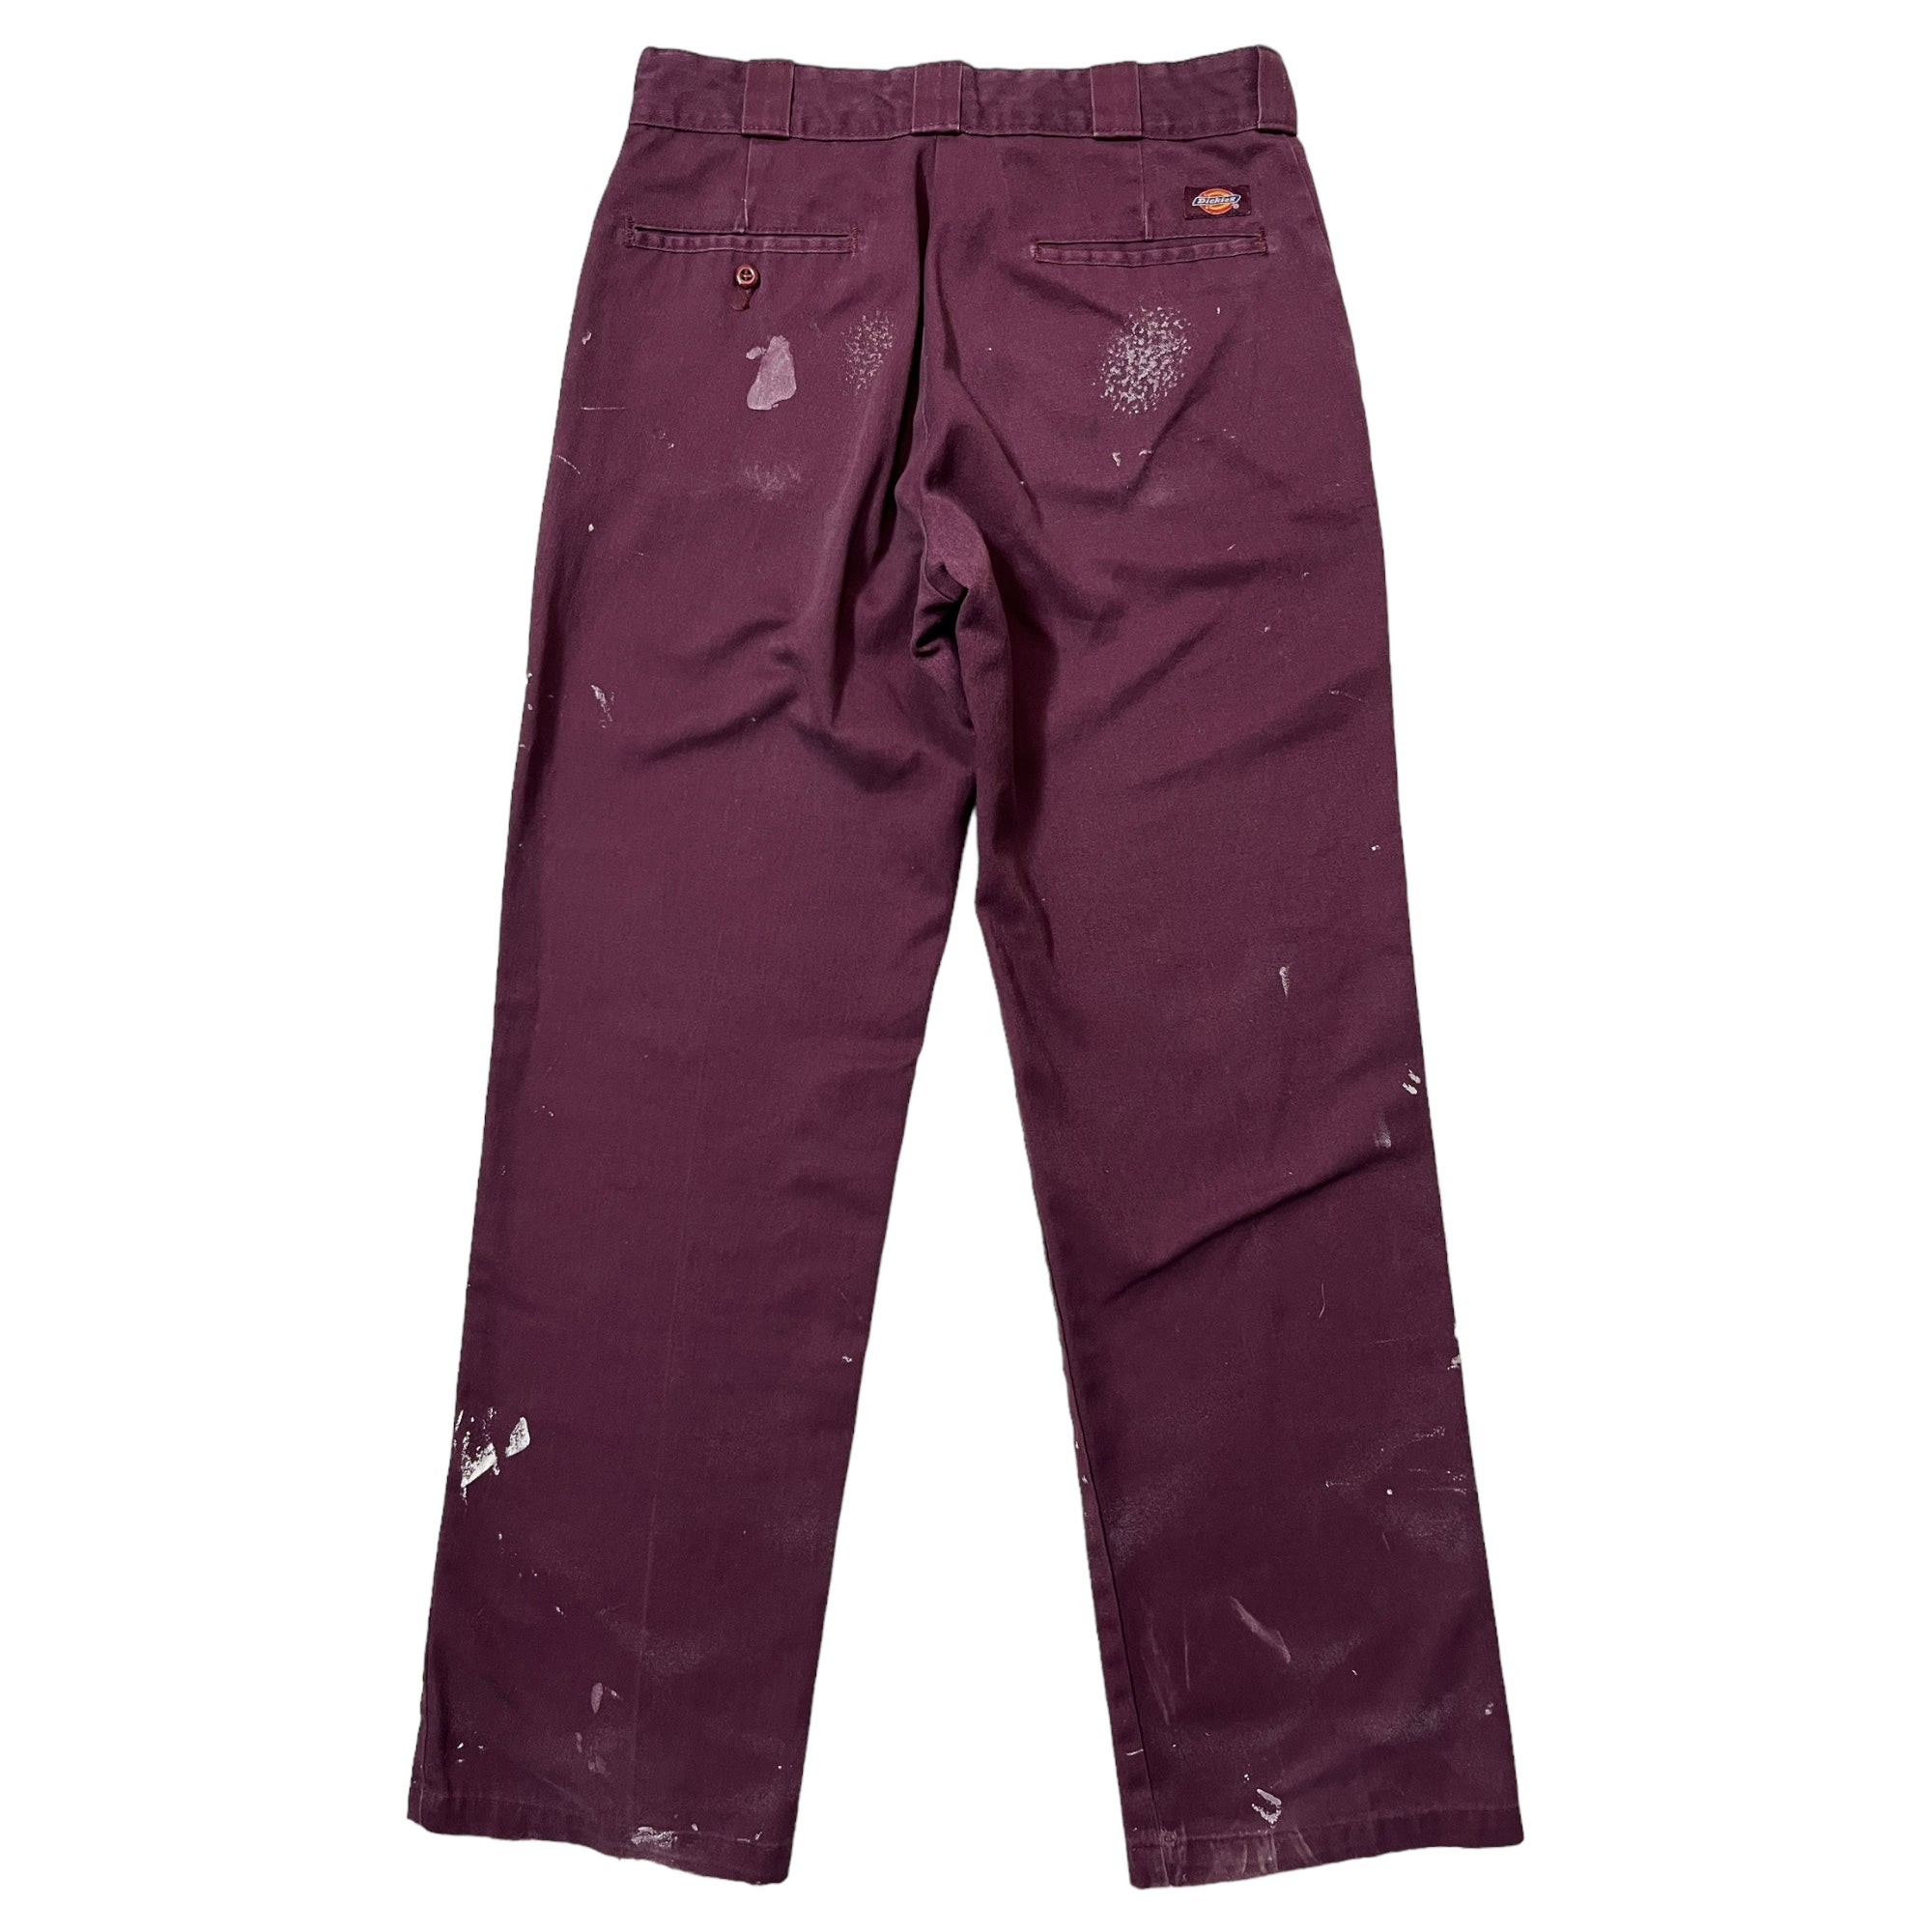 Late 90s Dickies 874 Work Trousers - Faded Bordeaux - 32x30